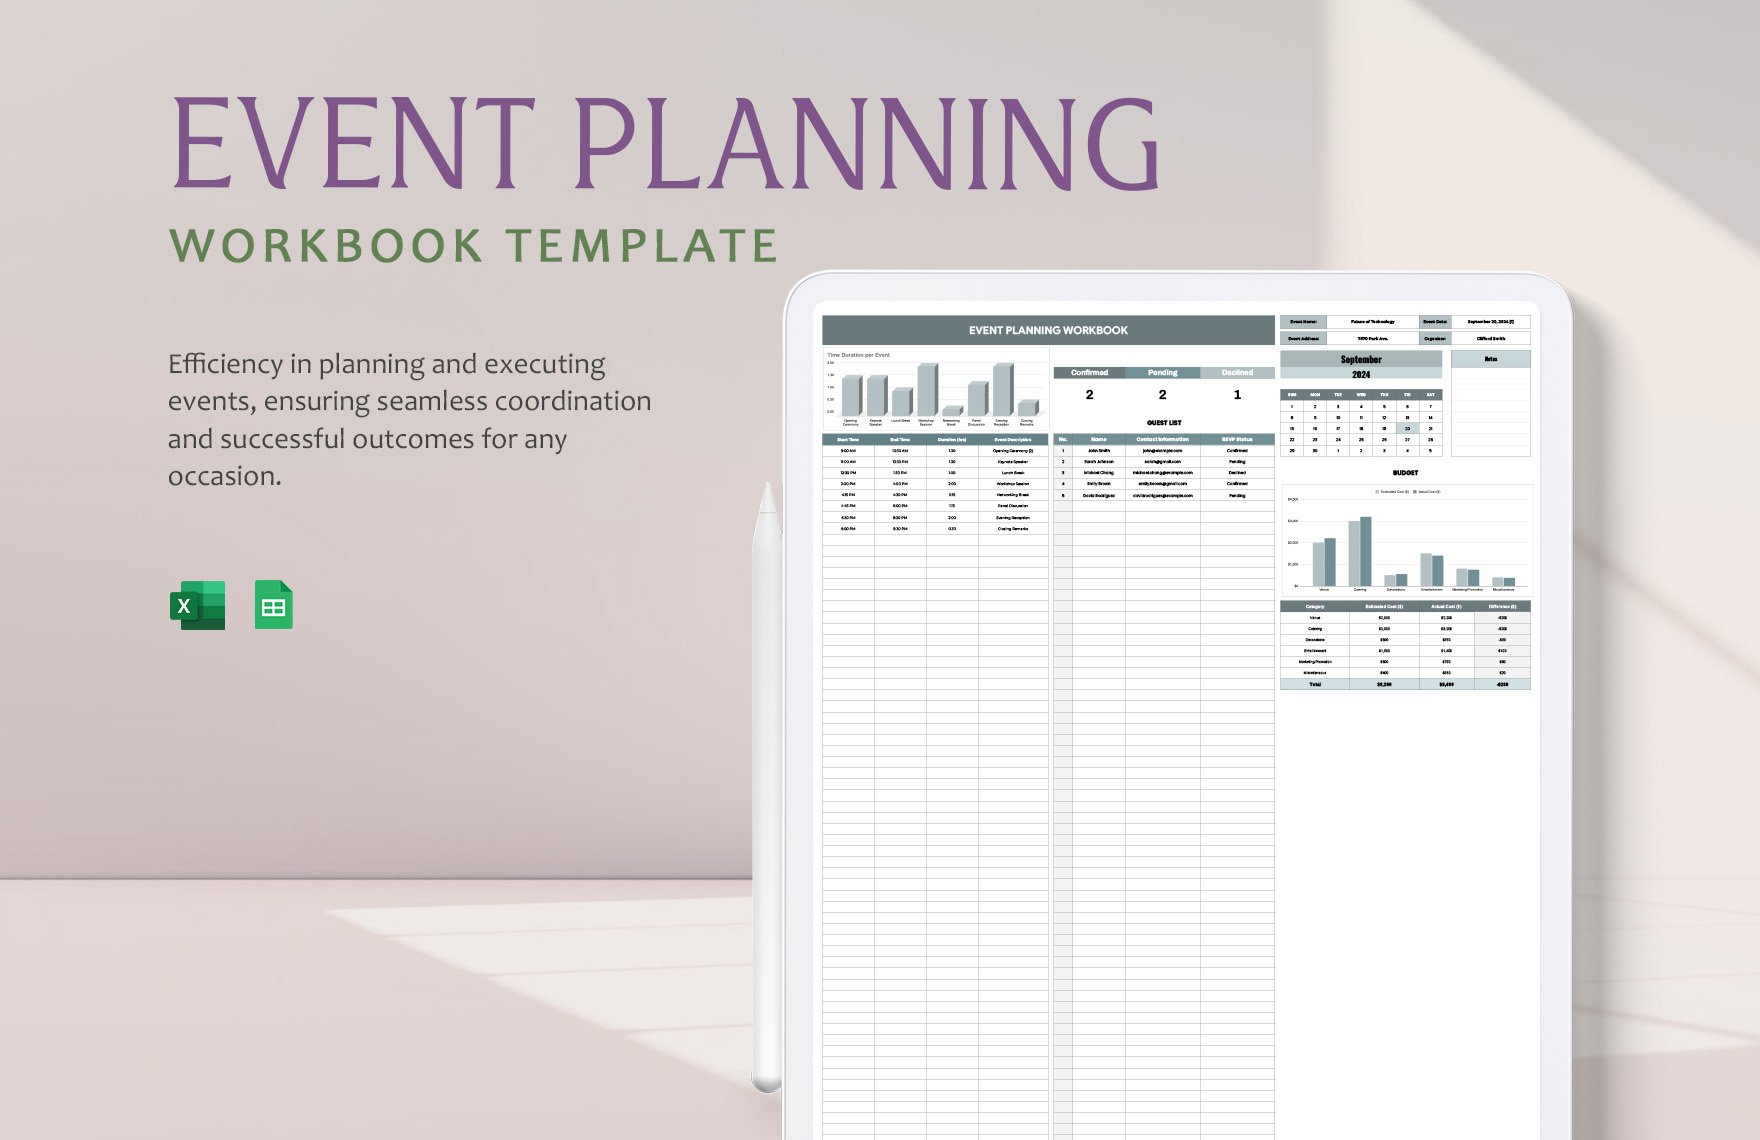 Event Planning Workbook Template in Excel, Google Sheets